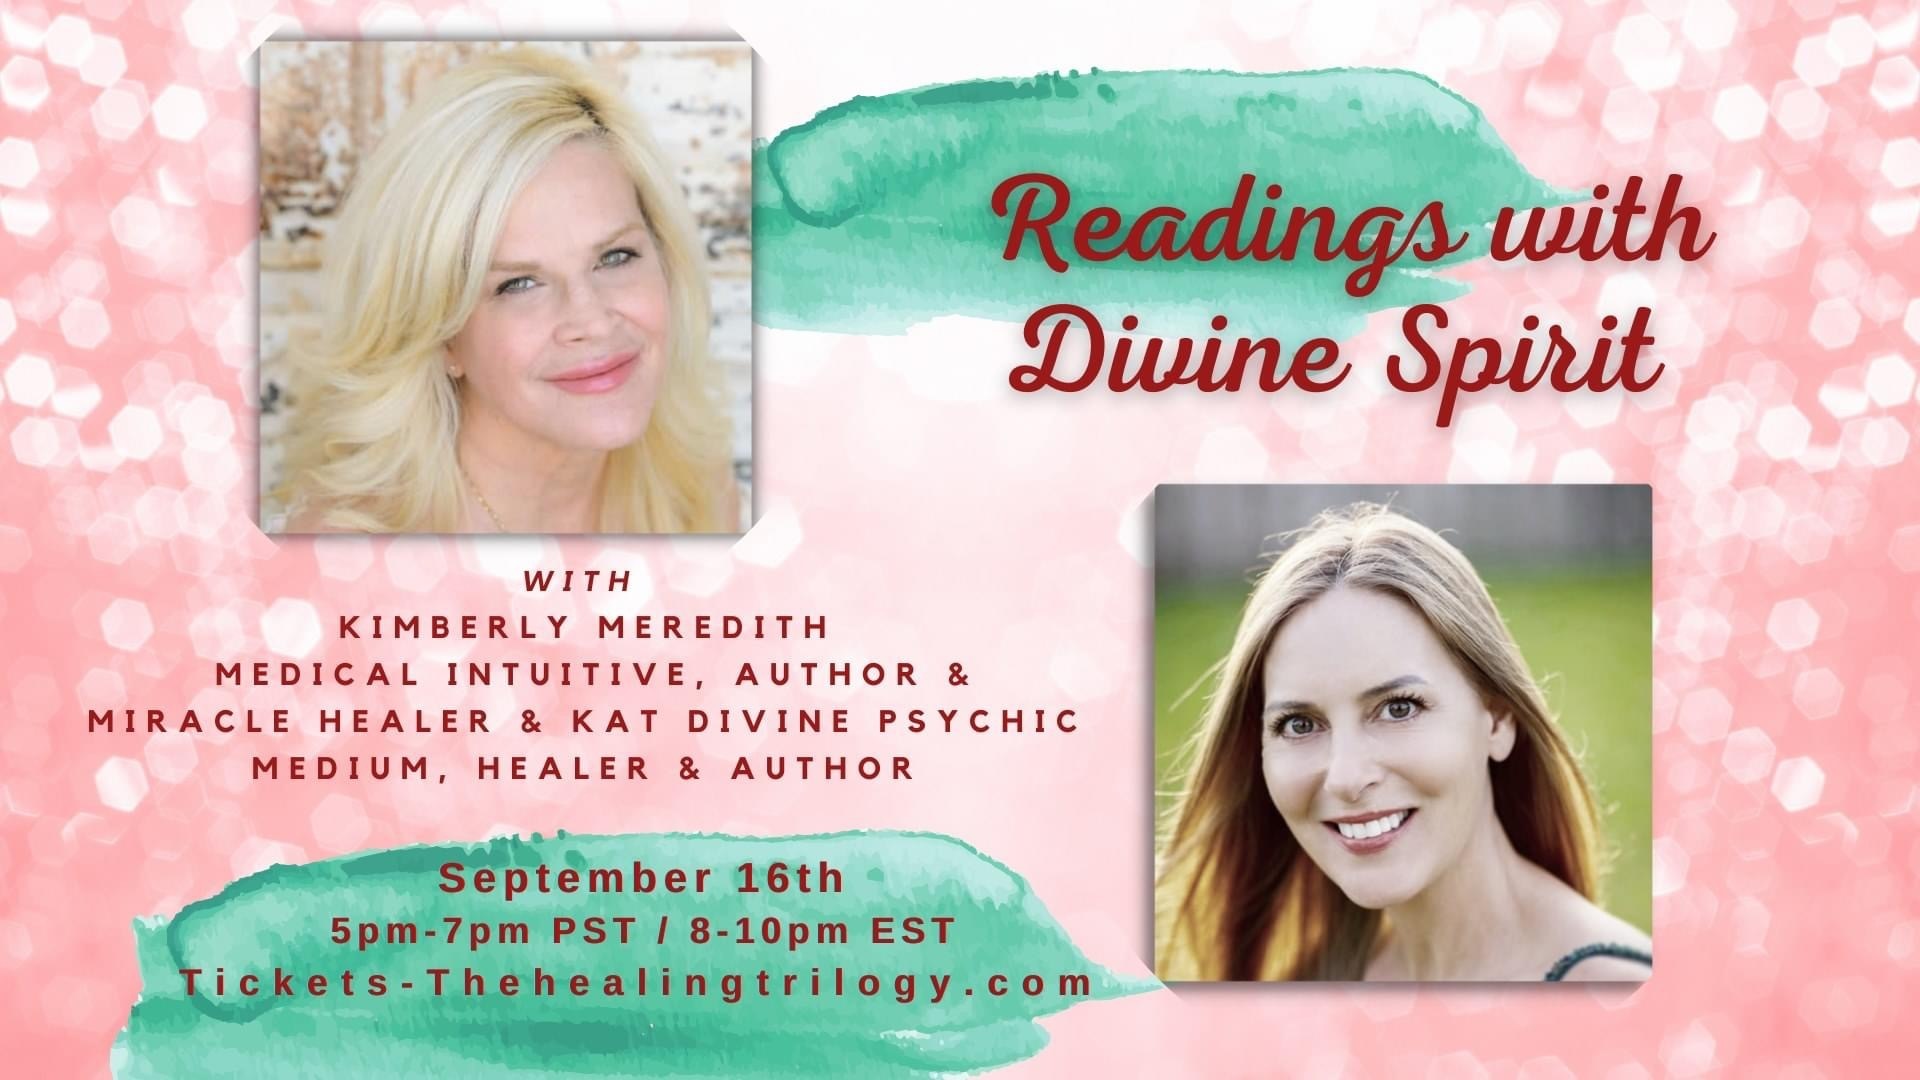 Mediumship and Medical Intuitive Readings with Divine Spirit September 16 Thehealingtrilogy.com, Online Event